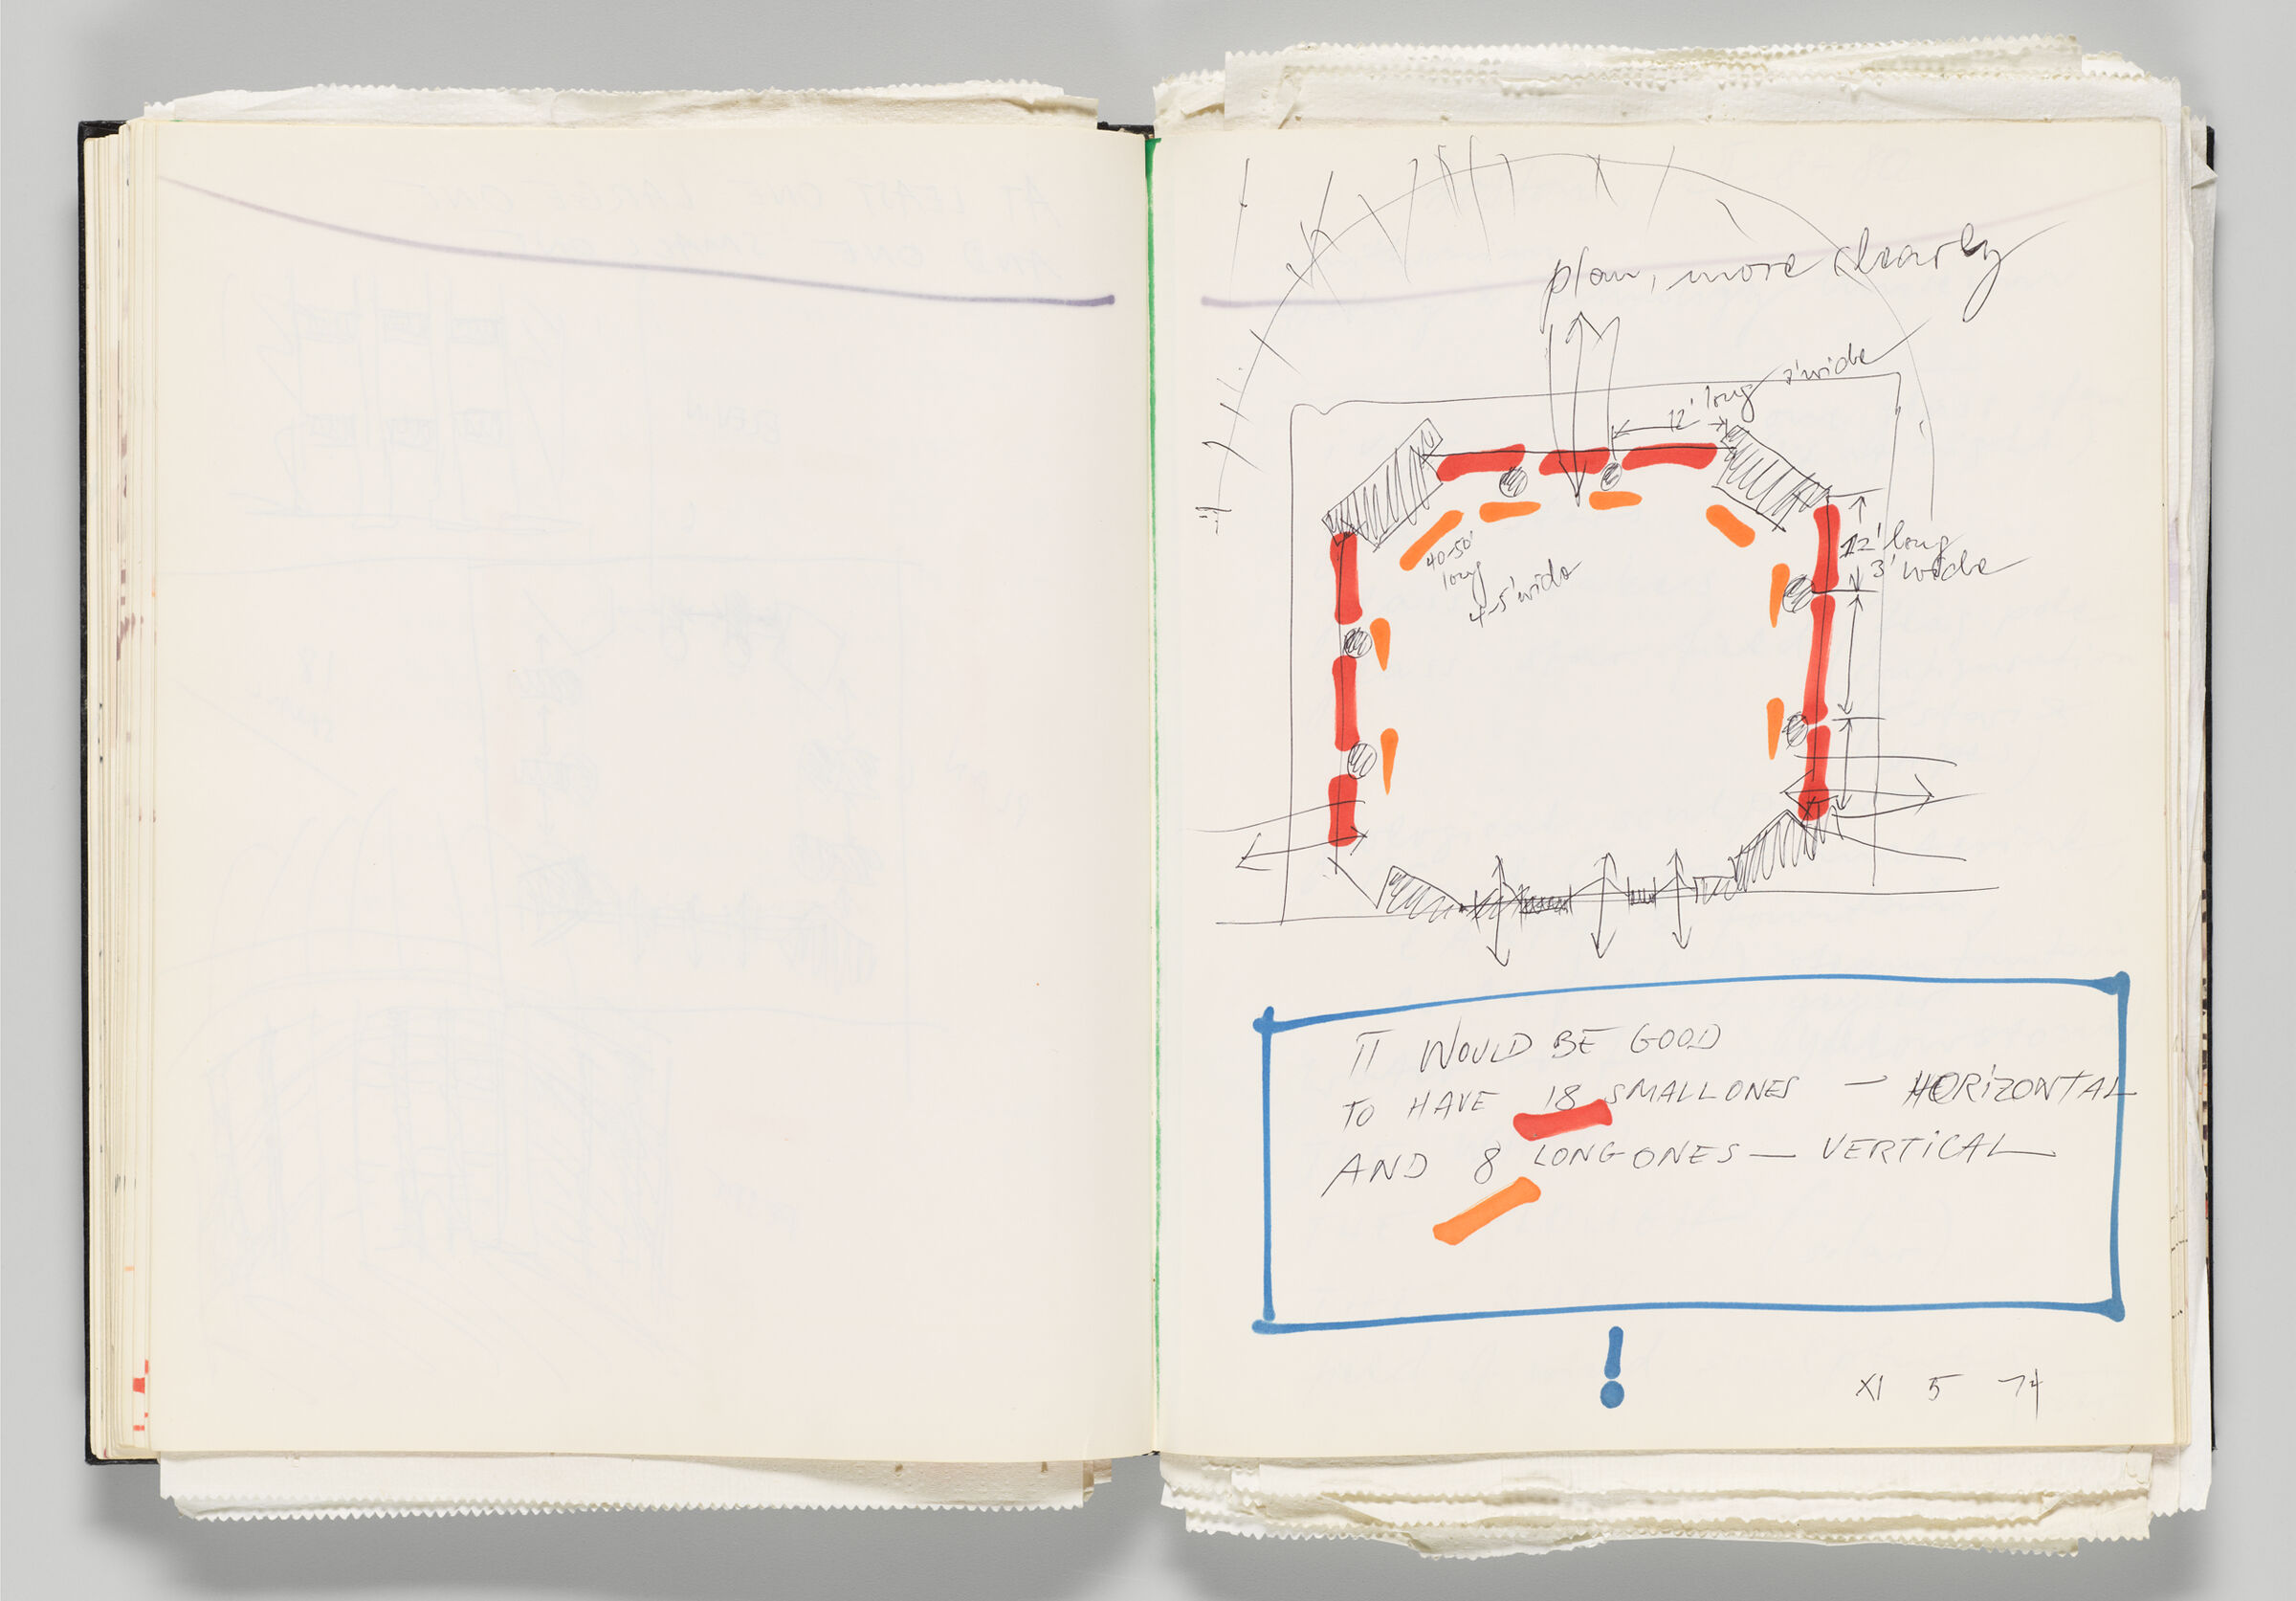 Untitled (Blank With Faint Color Transfer, Left Page); Untitled (Notes With Plan And Elevation, Right Page)